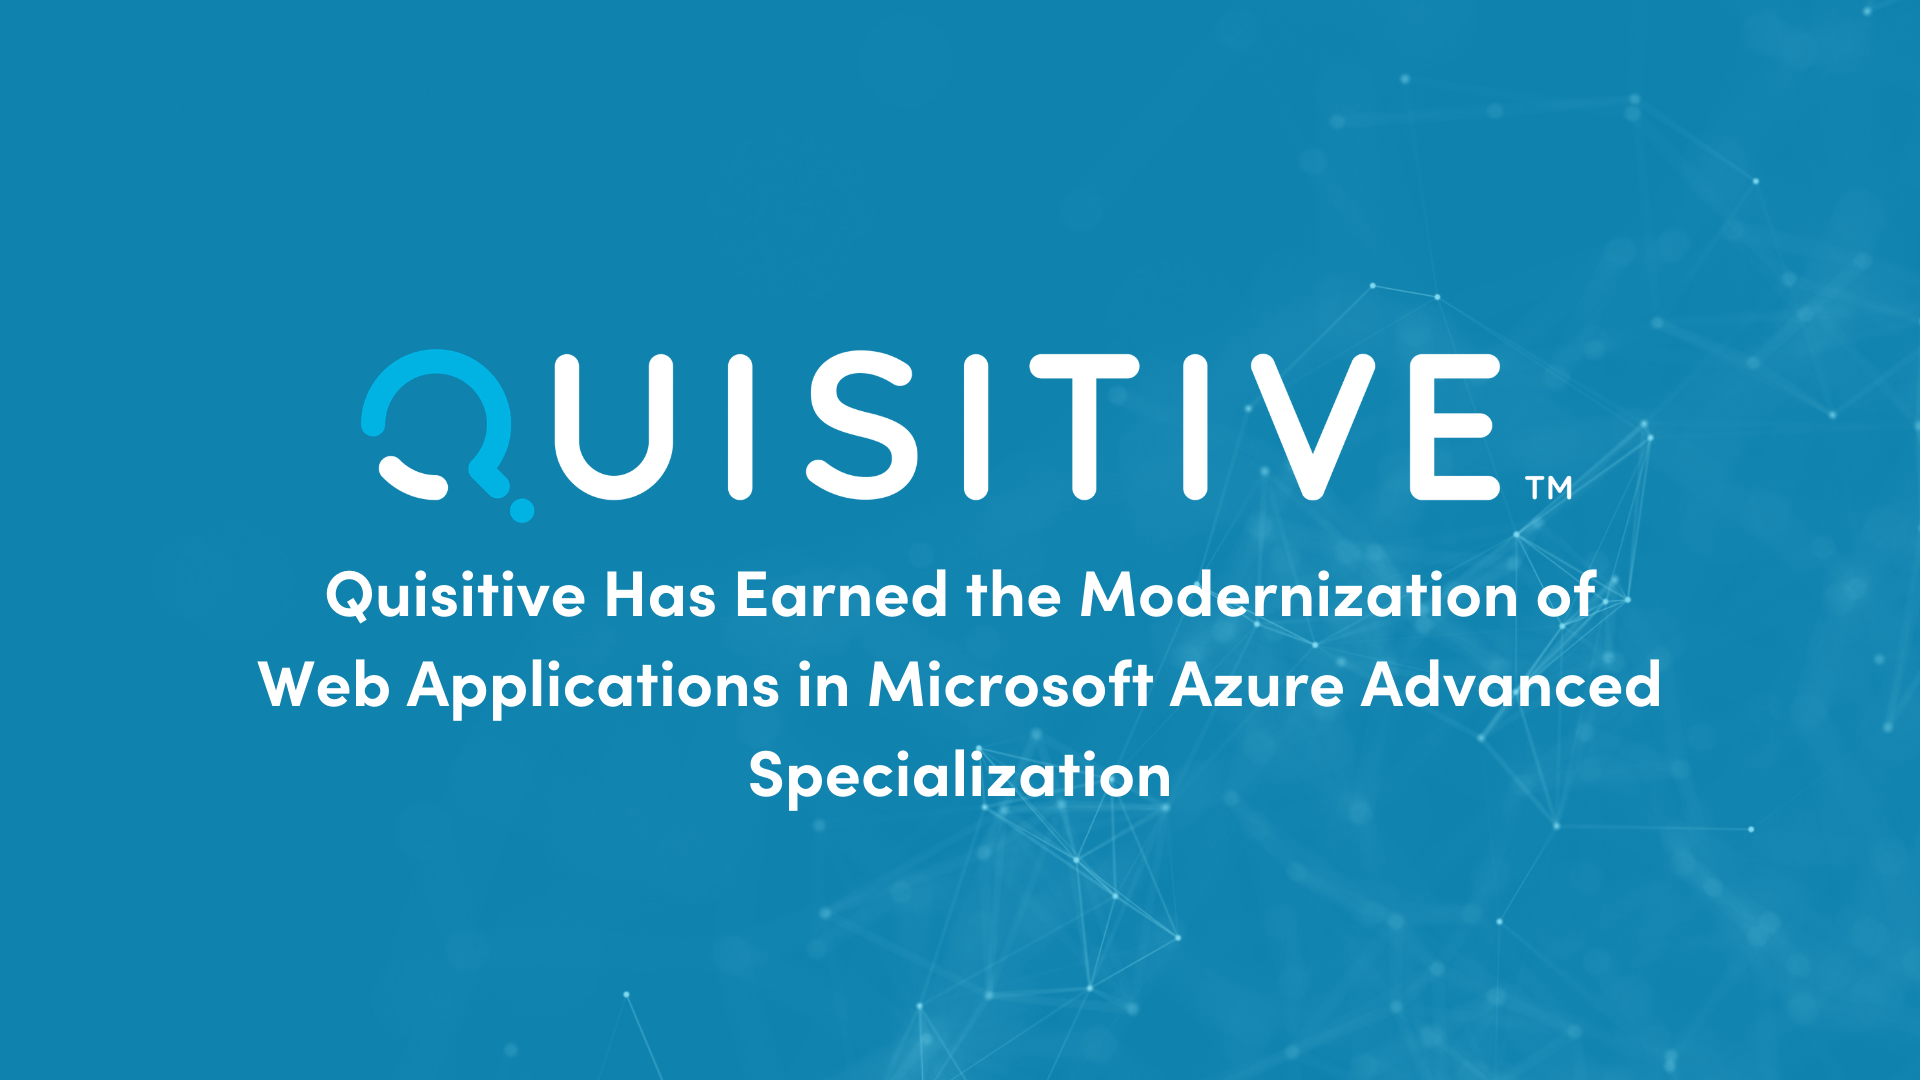 Blue background with digital web image and Quisitive logo reads "Quisitive Has Earned the Modernization of Web Applications in Microsoft Azure Advanced Specialization"